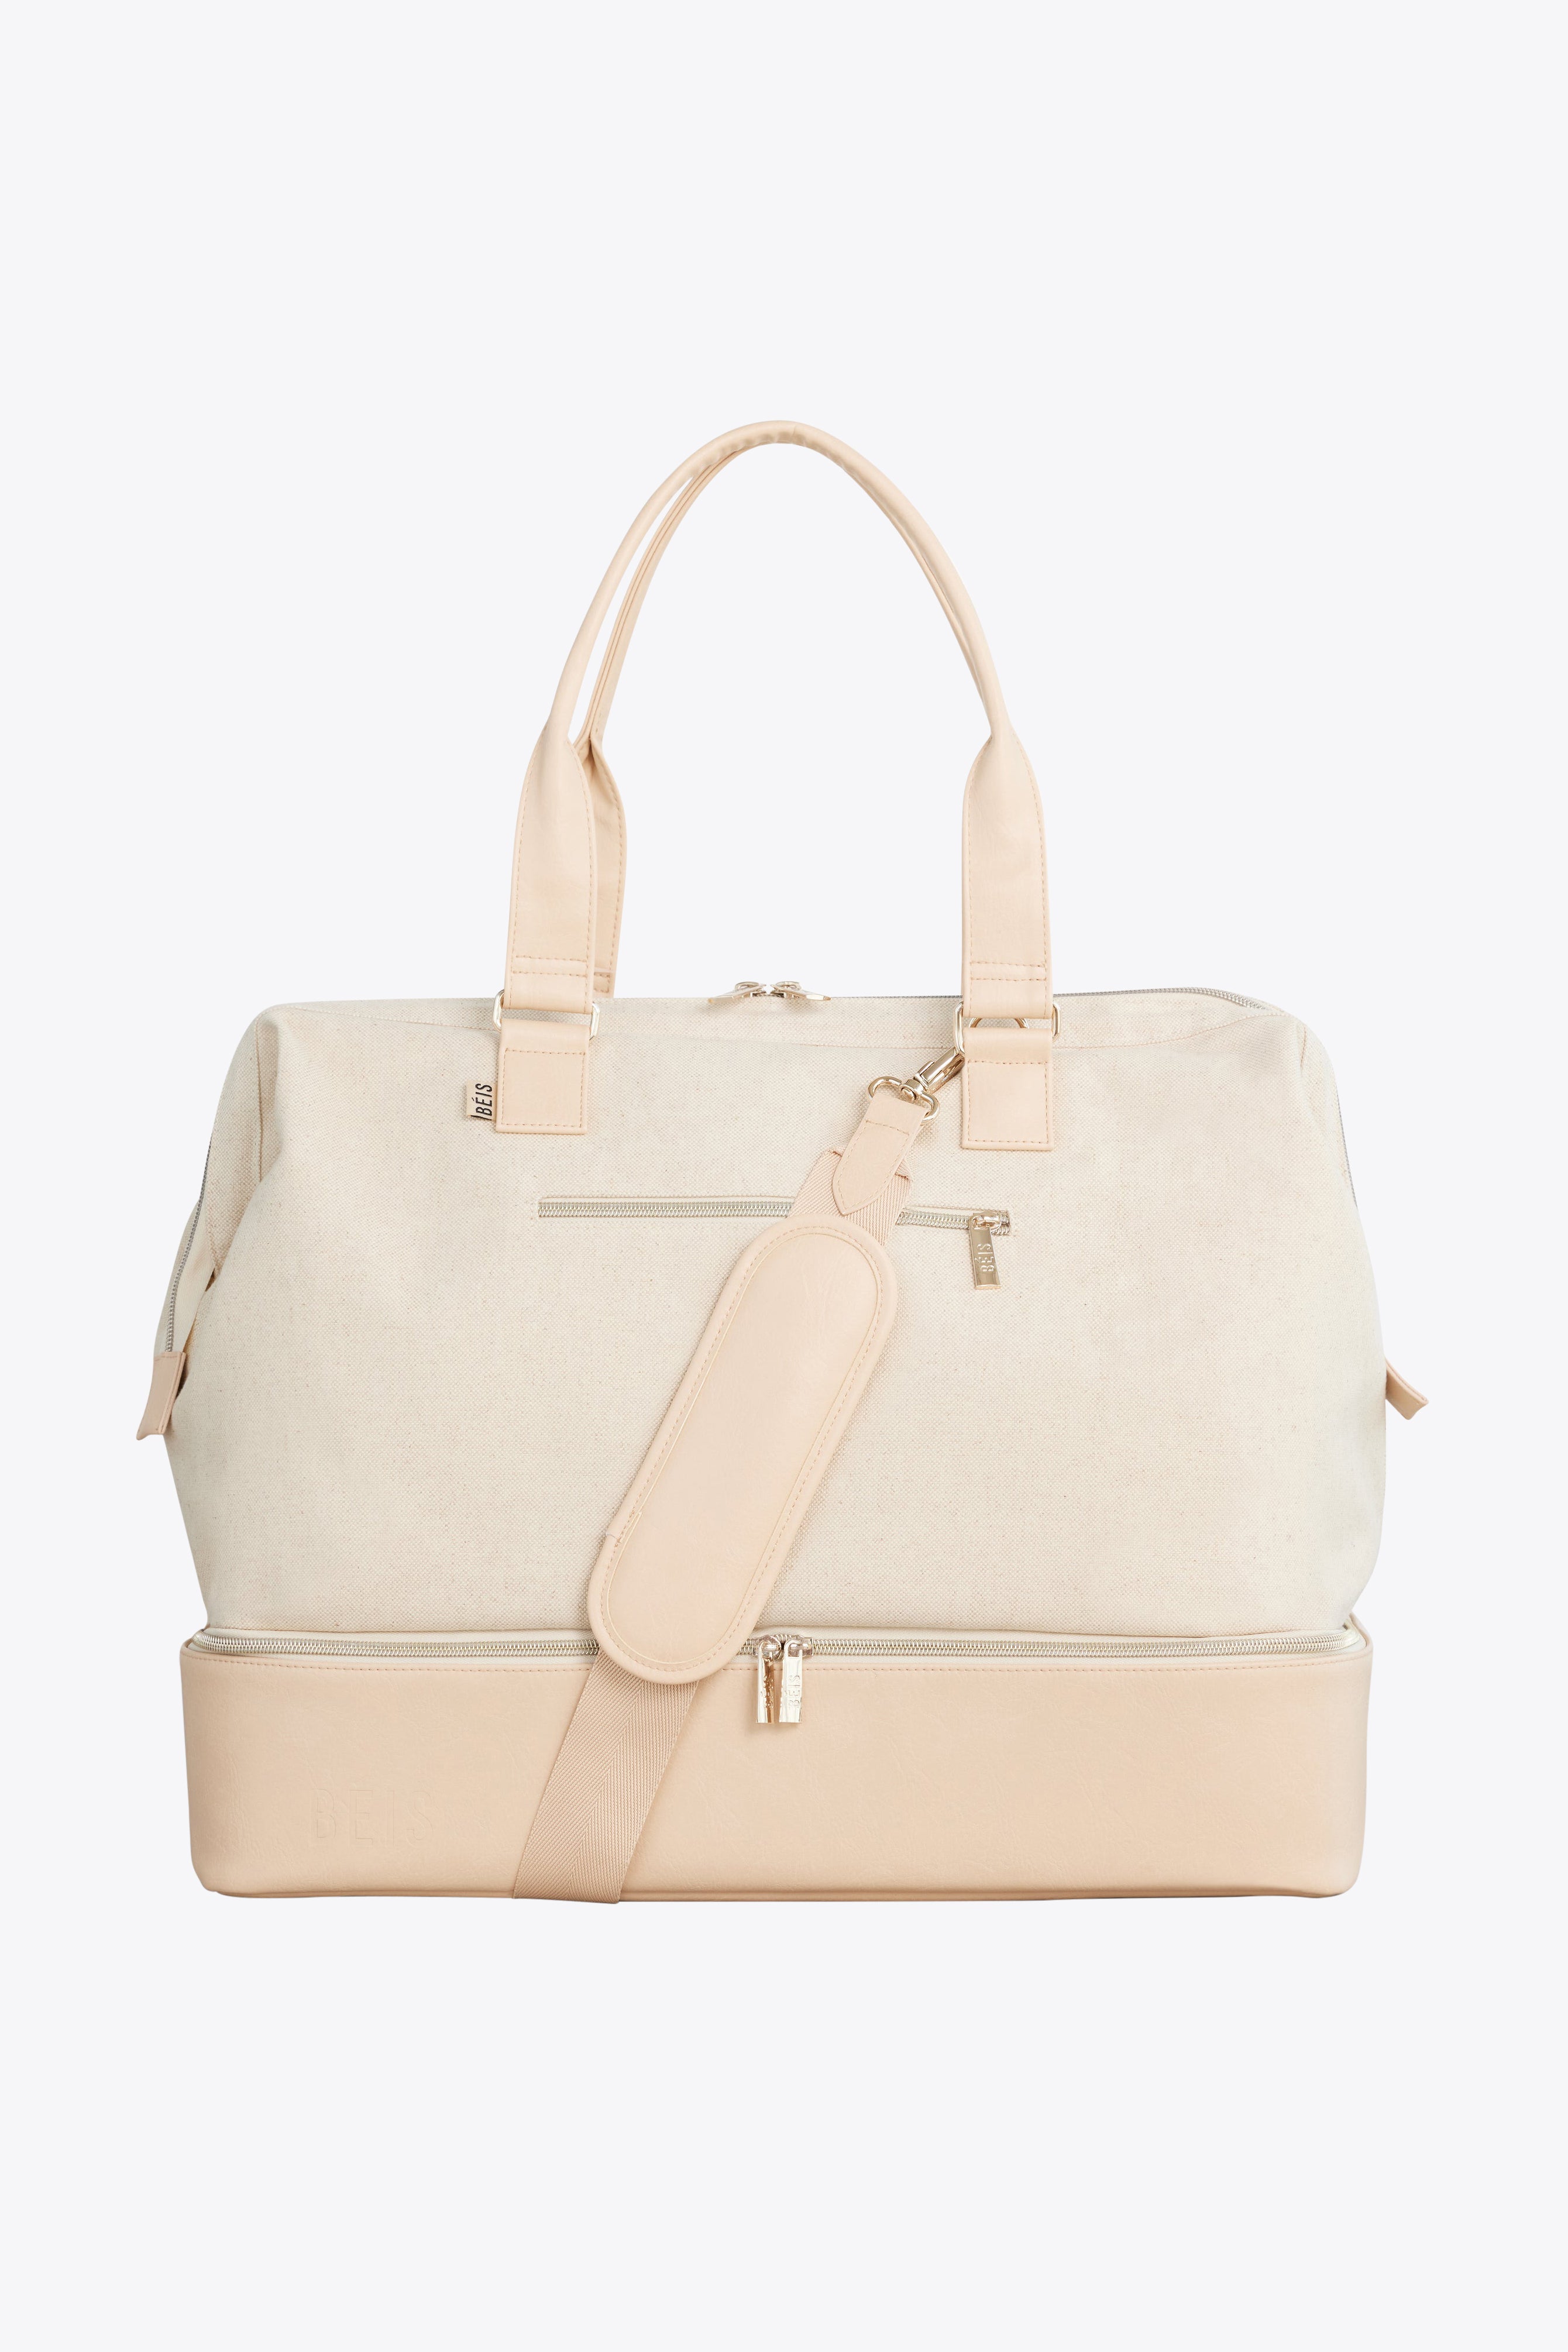 Borsa Leather-Trimmed Canvas Weekend Bag